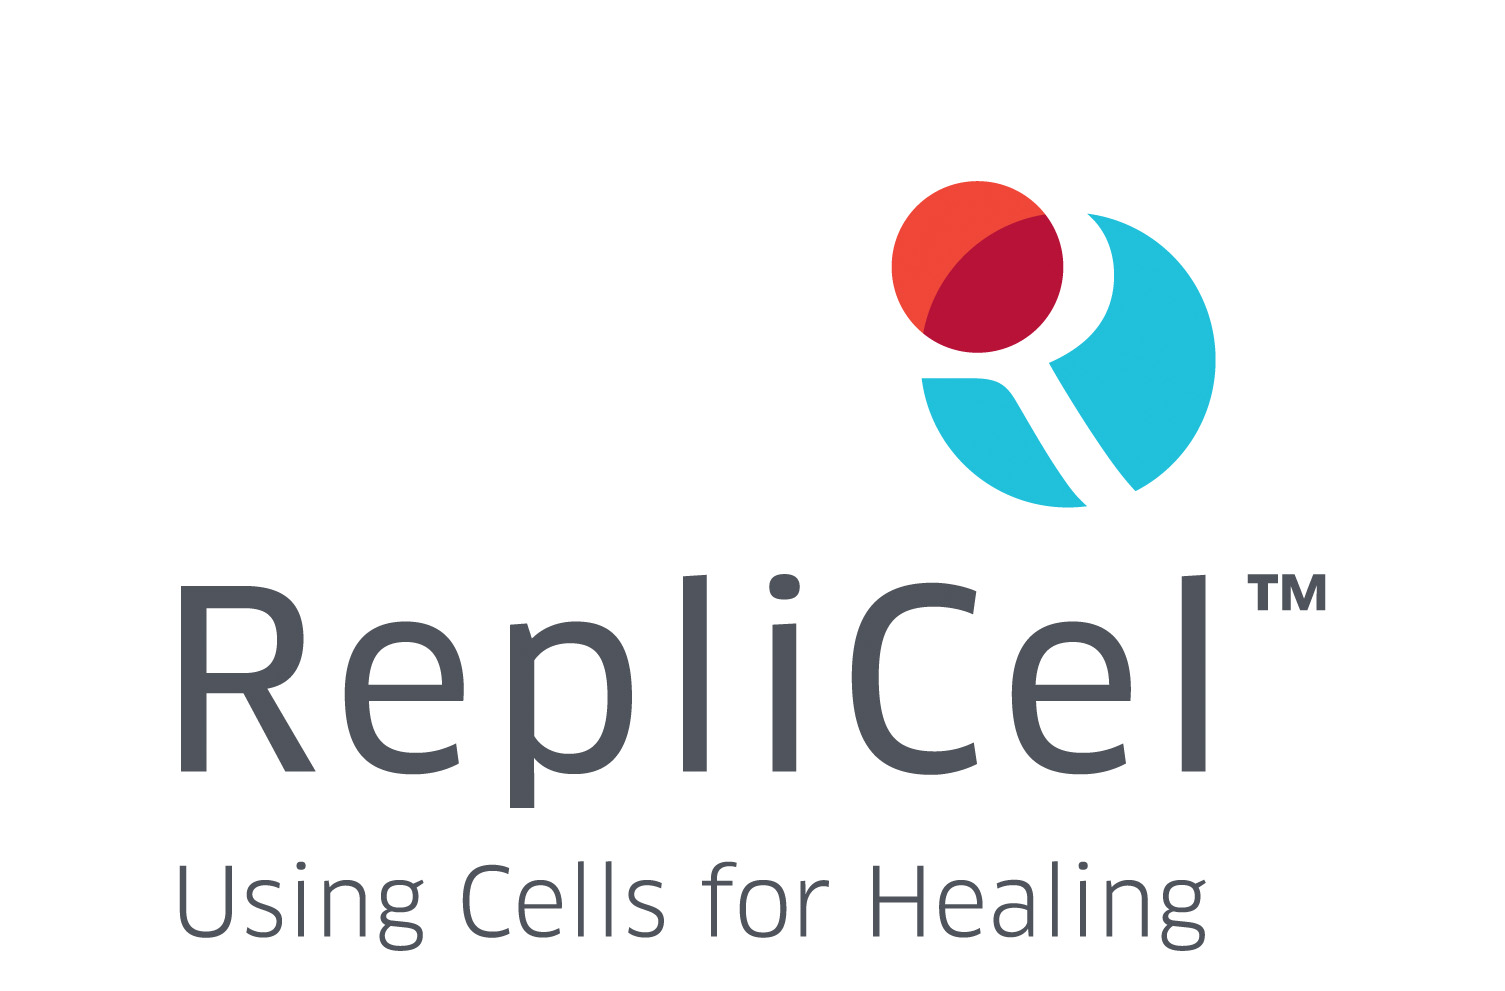 RepliCel Life Sciences, Inc., Monday, May 3, 2021, Press release picture